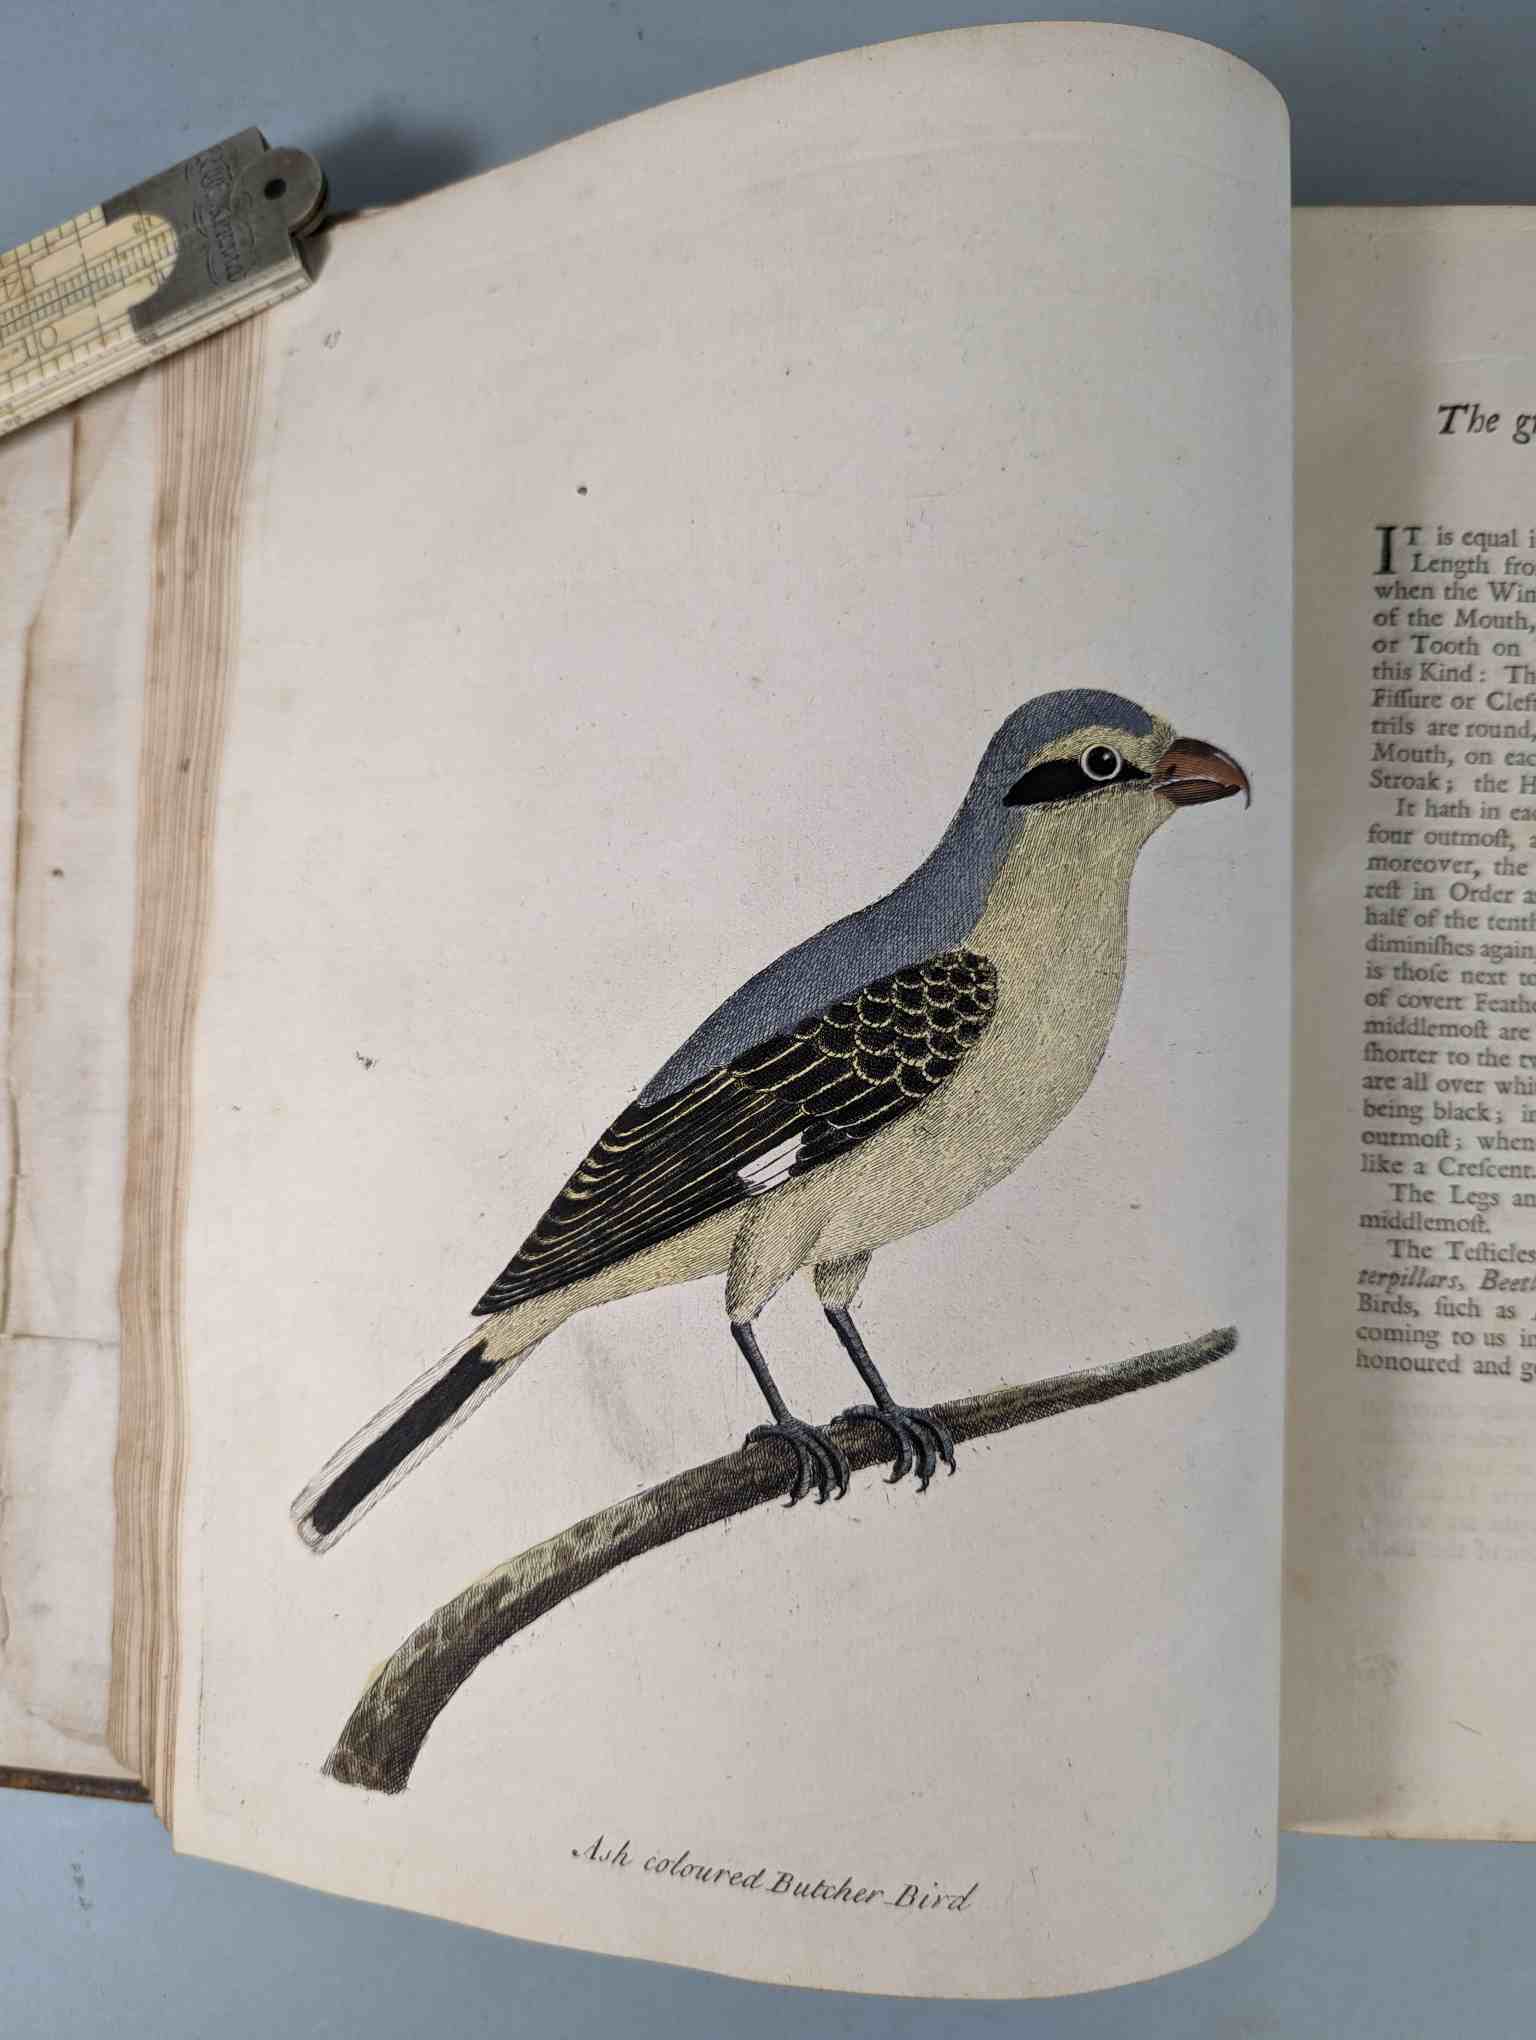 ALBIN, Eleazar. A Natural History of Birds, to which are added, Notes and Observations by W. - Image 117 of 208